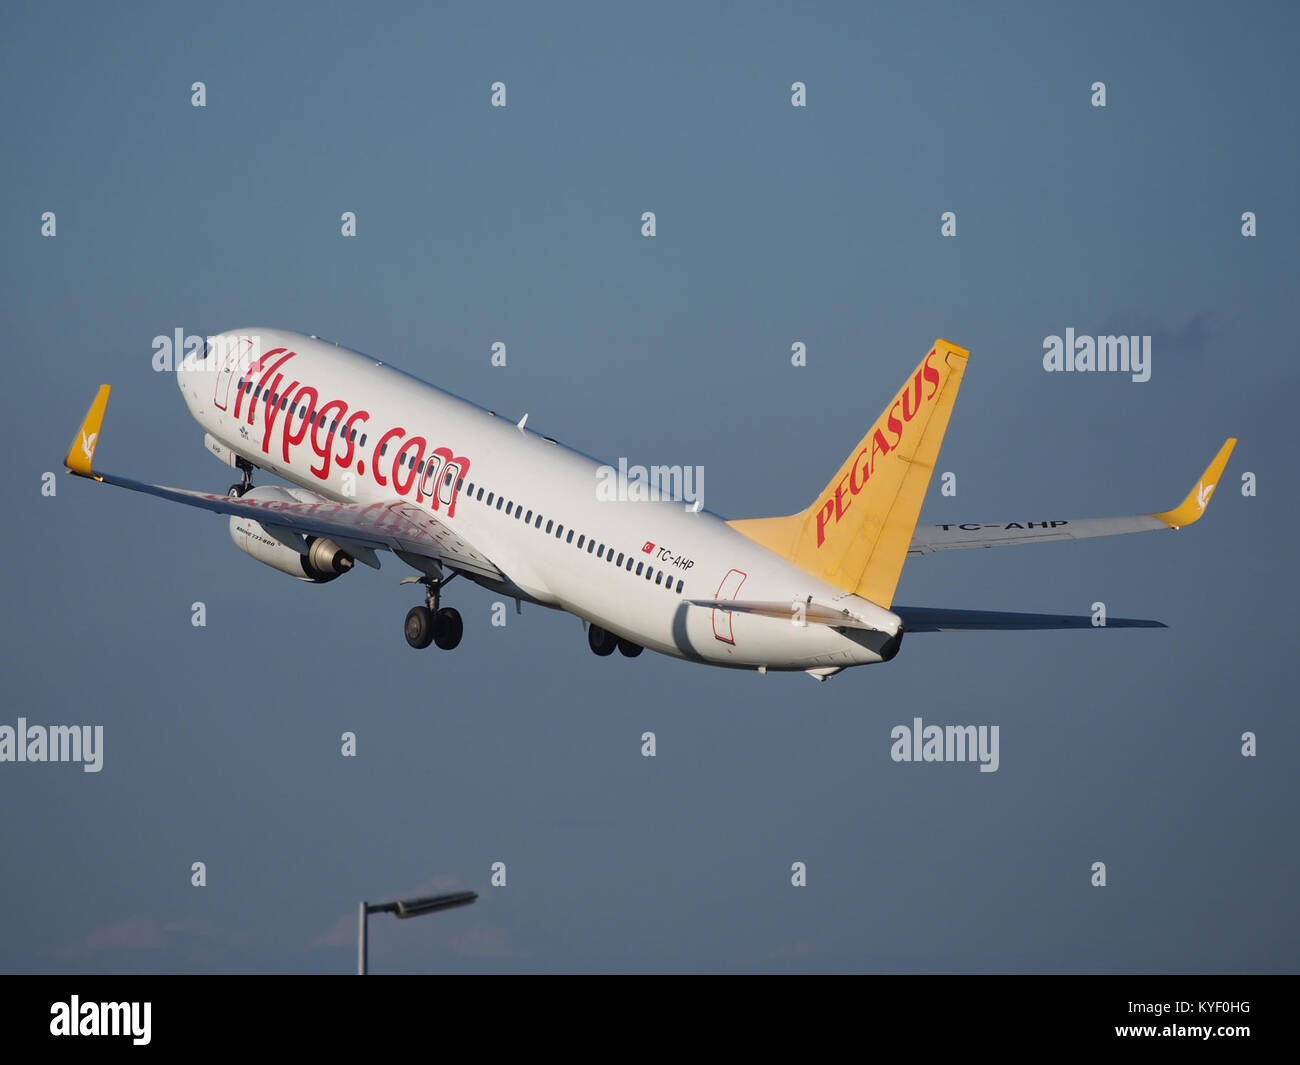 TC-AHP Pegasus Boeing 737-82R(WL) cn40721 takeoff from Schiphol (AMS - EHAM), The Netherlands pic4 Stock Photo